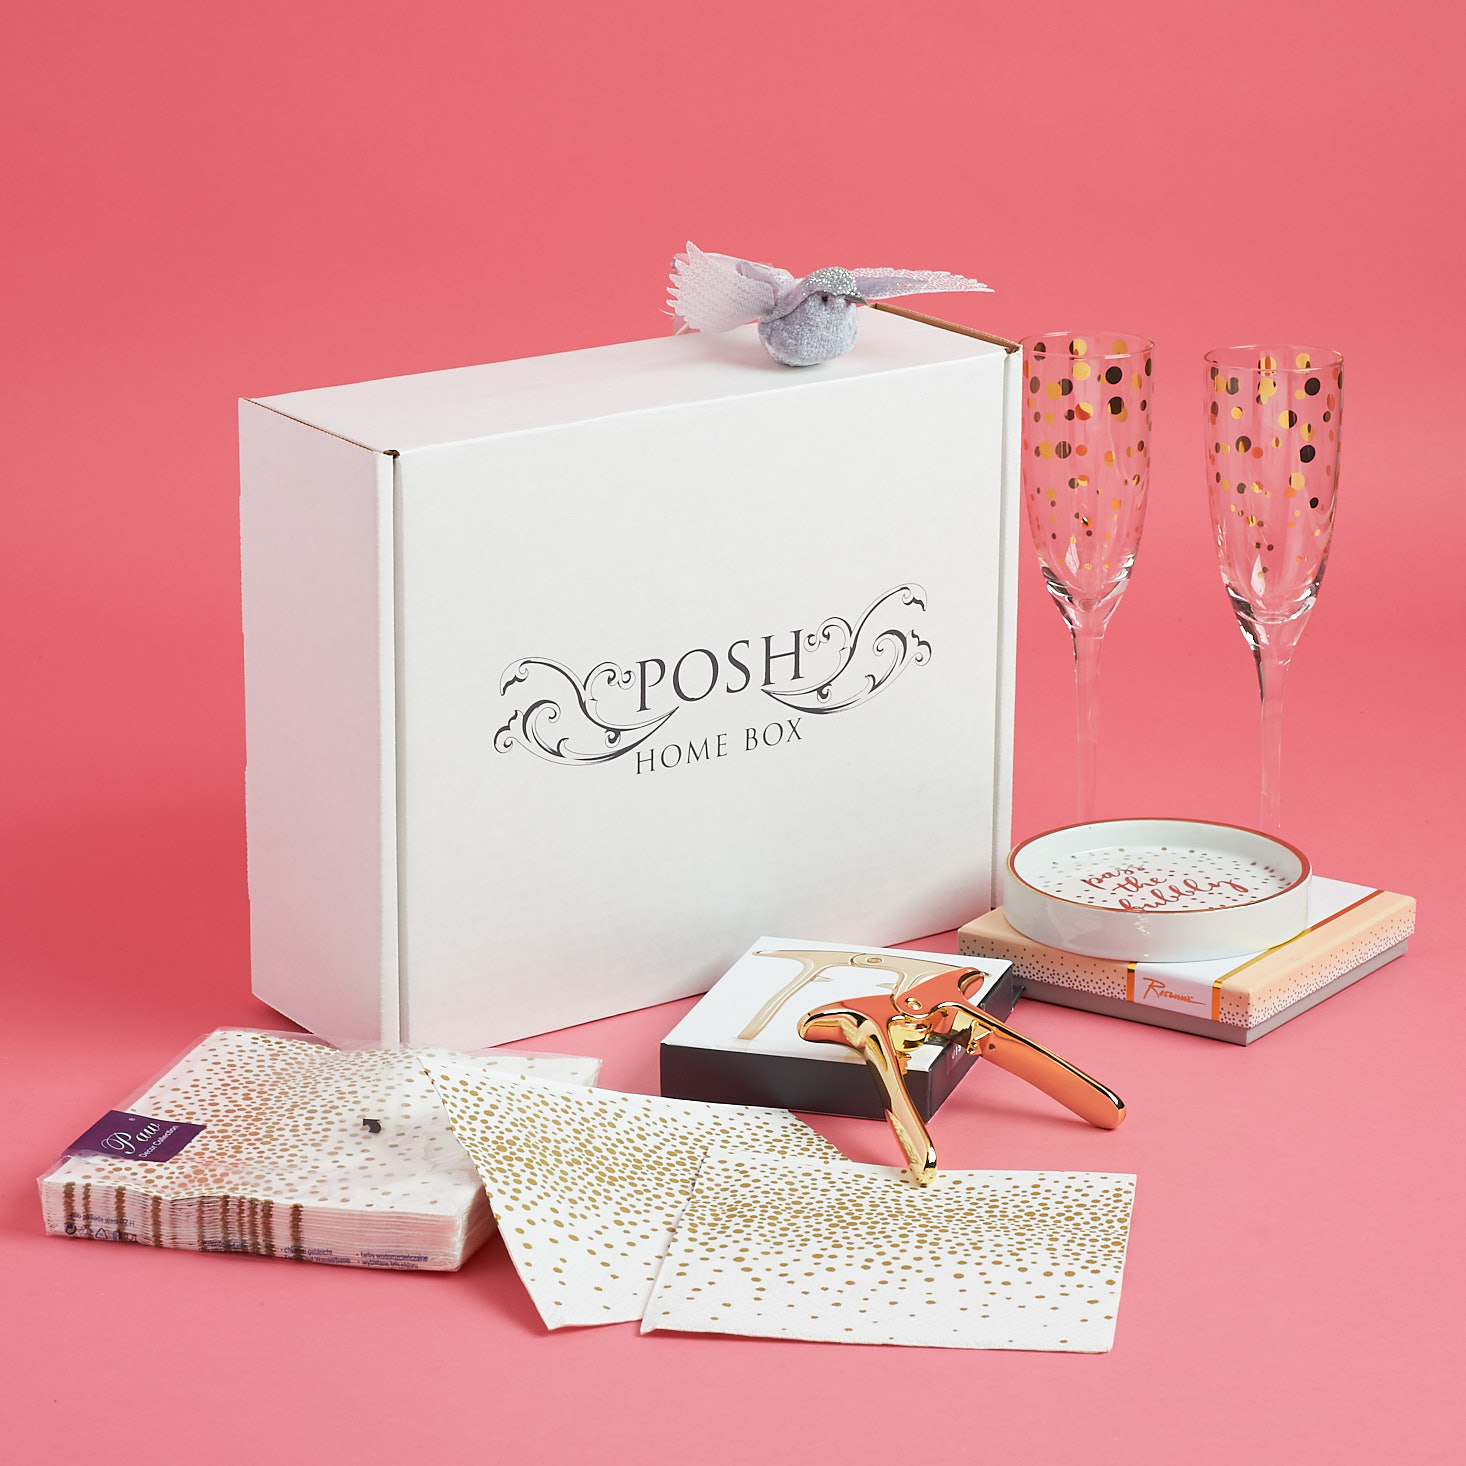 Festive wine flutes, metallic napkins, and more from the Posh Home Box.